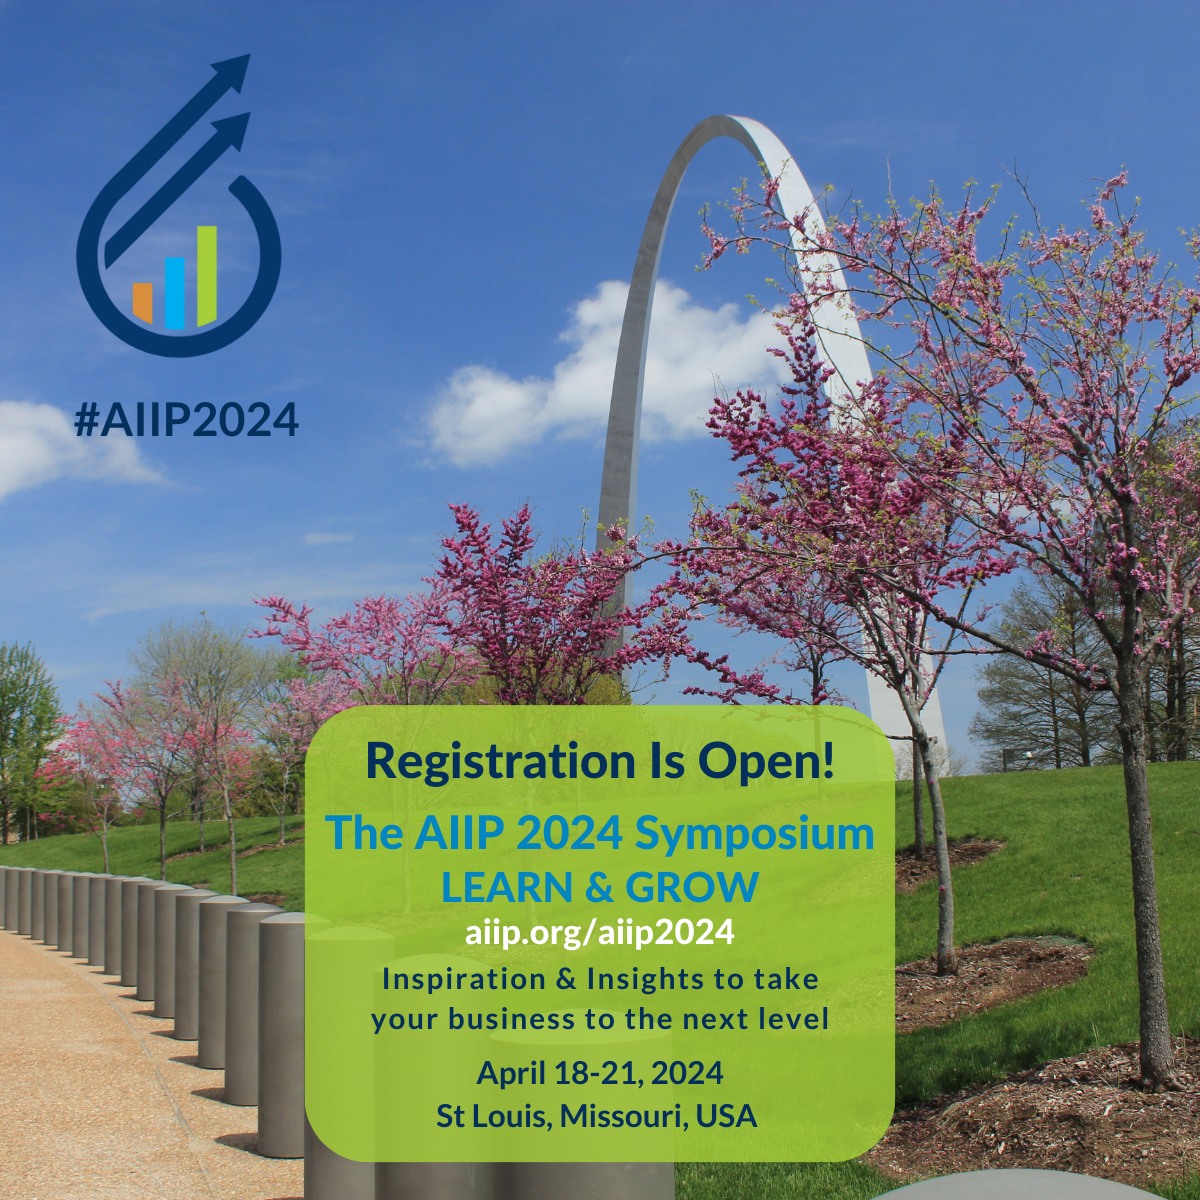 Graphic showing registration is open for AIIP 2024 Symposium: Learn & Grow, April 18-21, 2024 in St. Louis. There is the St. Louis Arch and flowering trees in the background.